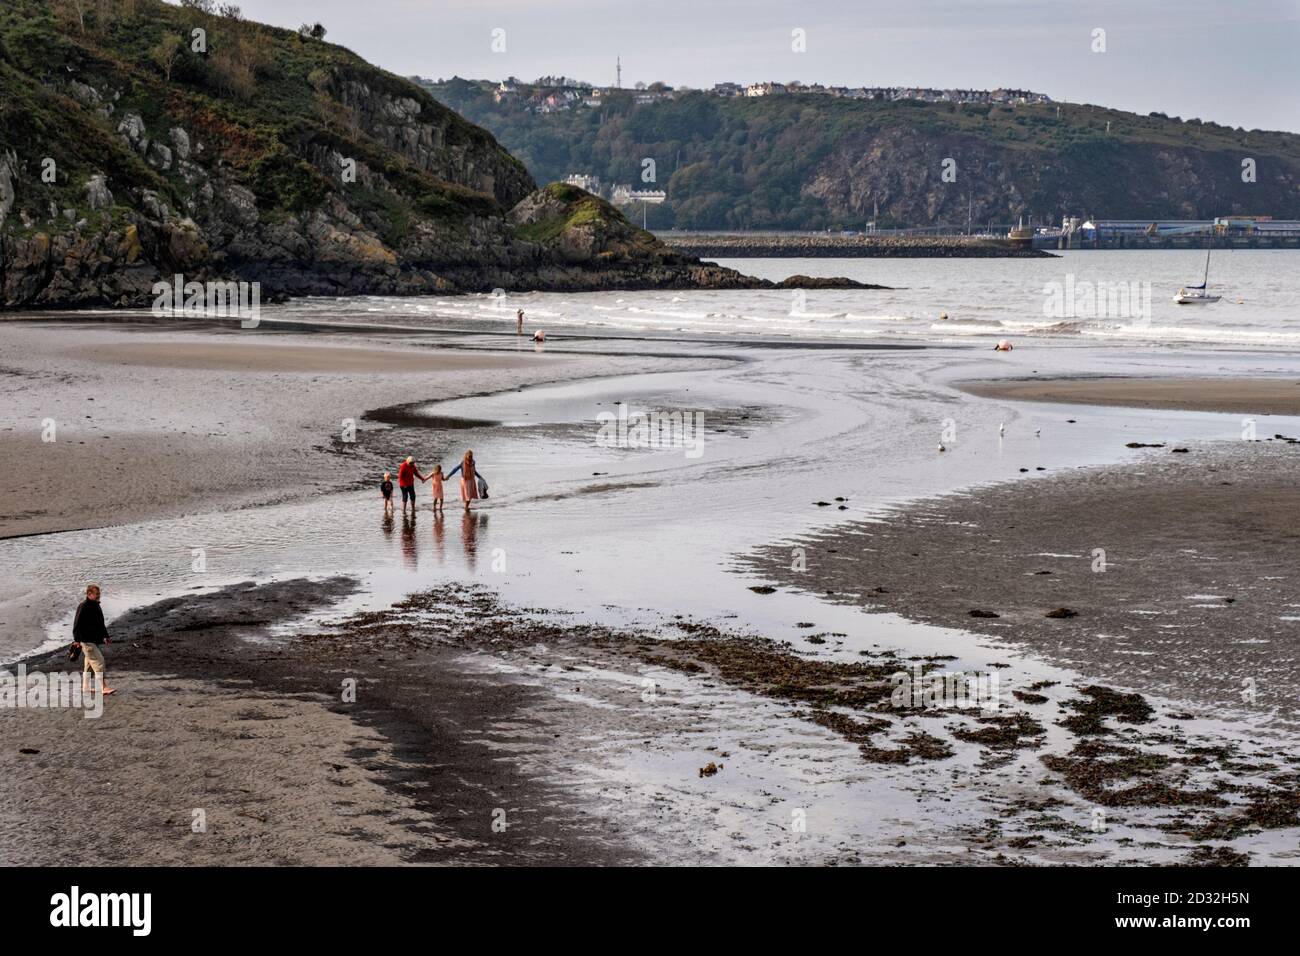 A family crosses the beach at low tide in Lower Fishguard harbour,   Pembrokeshire, Wales, UK Stock Photo